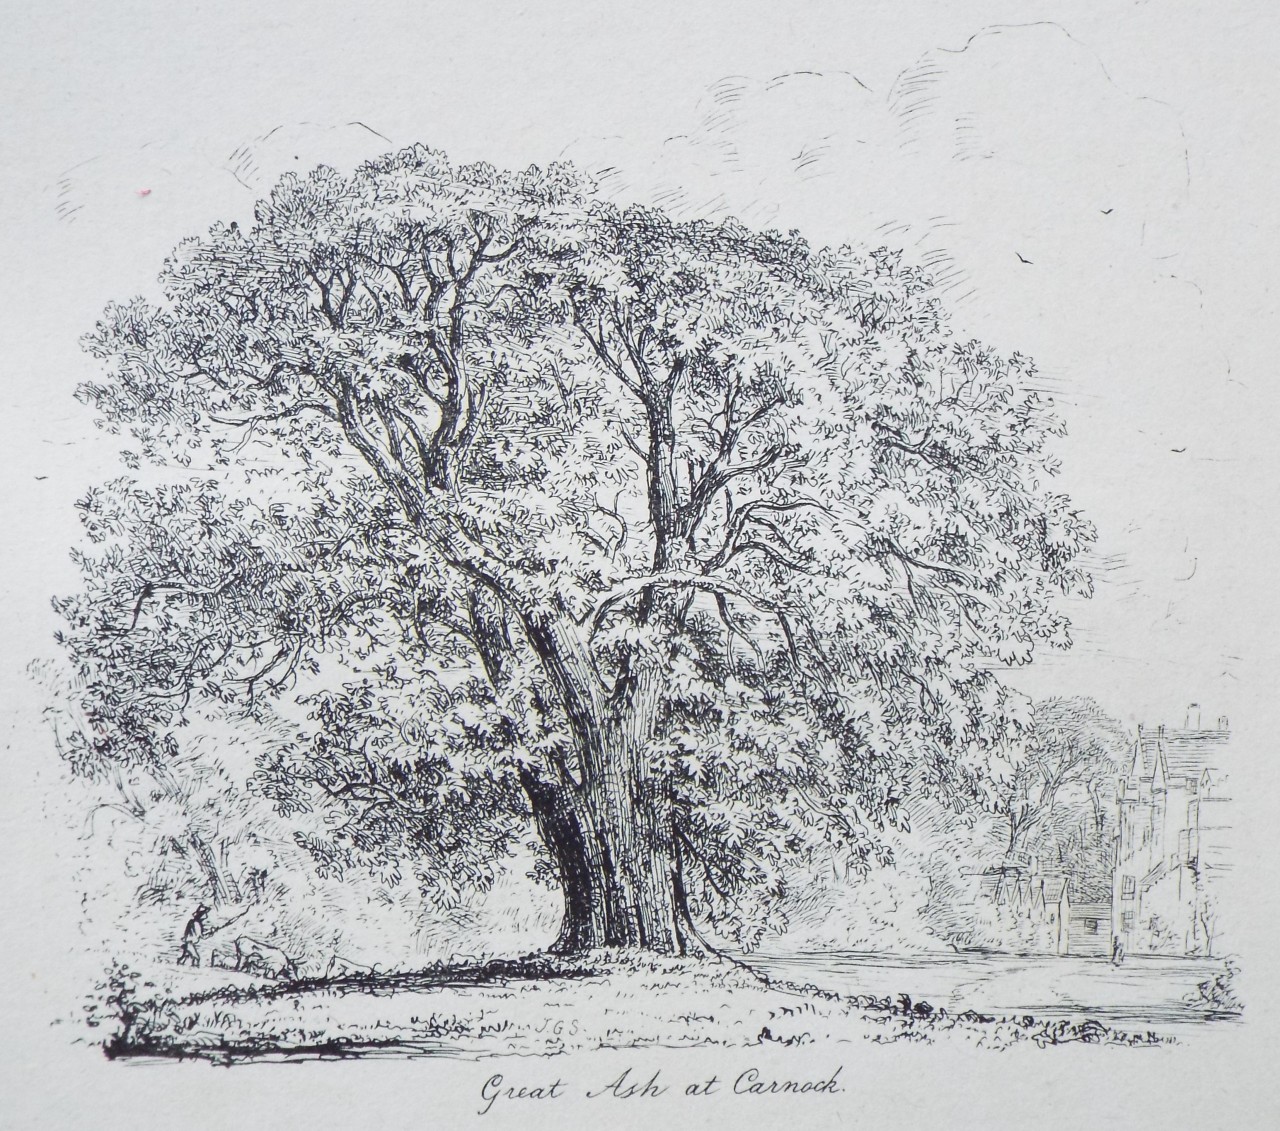 Etching - Great Ash at Carnock. - Strutt